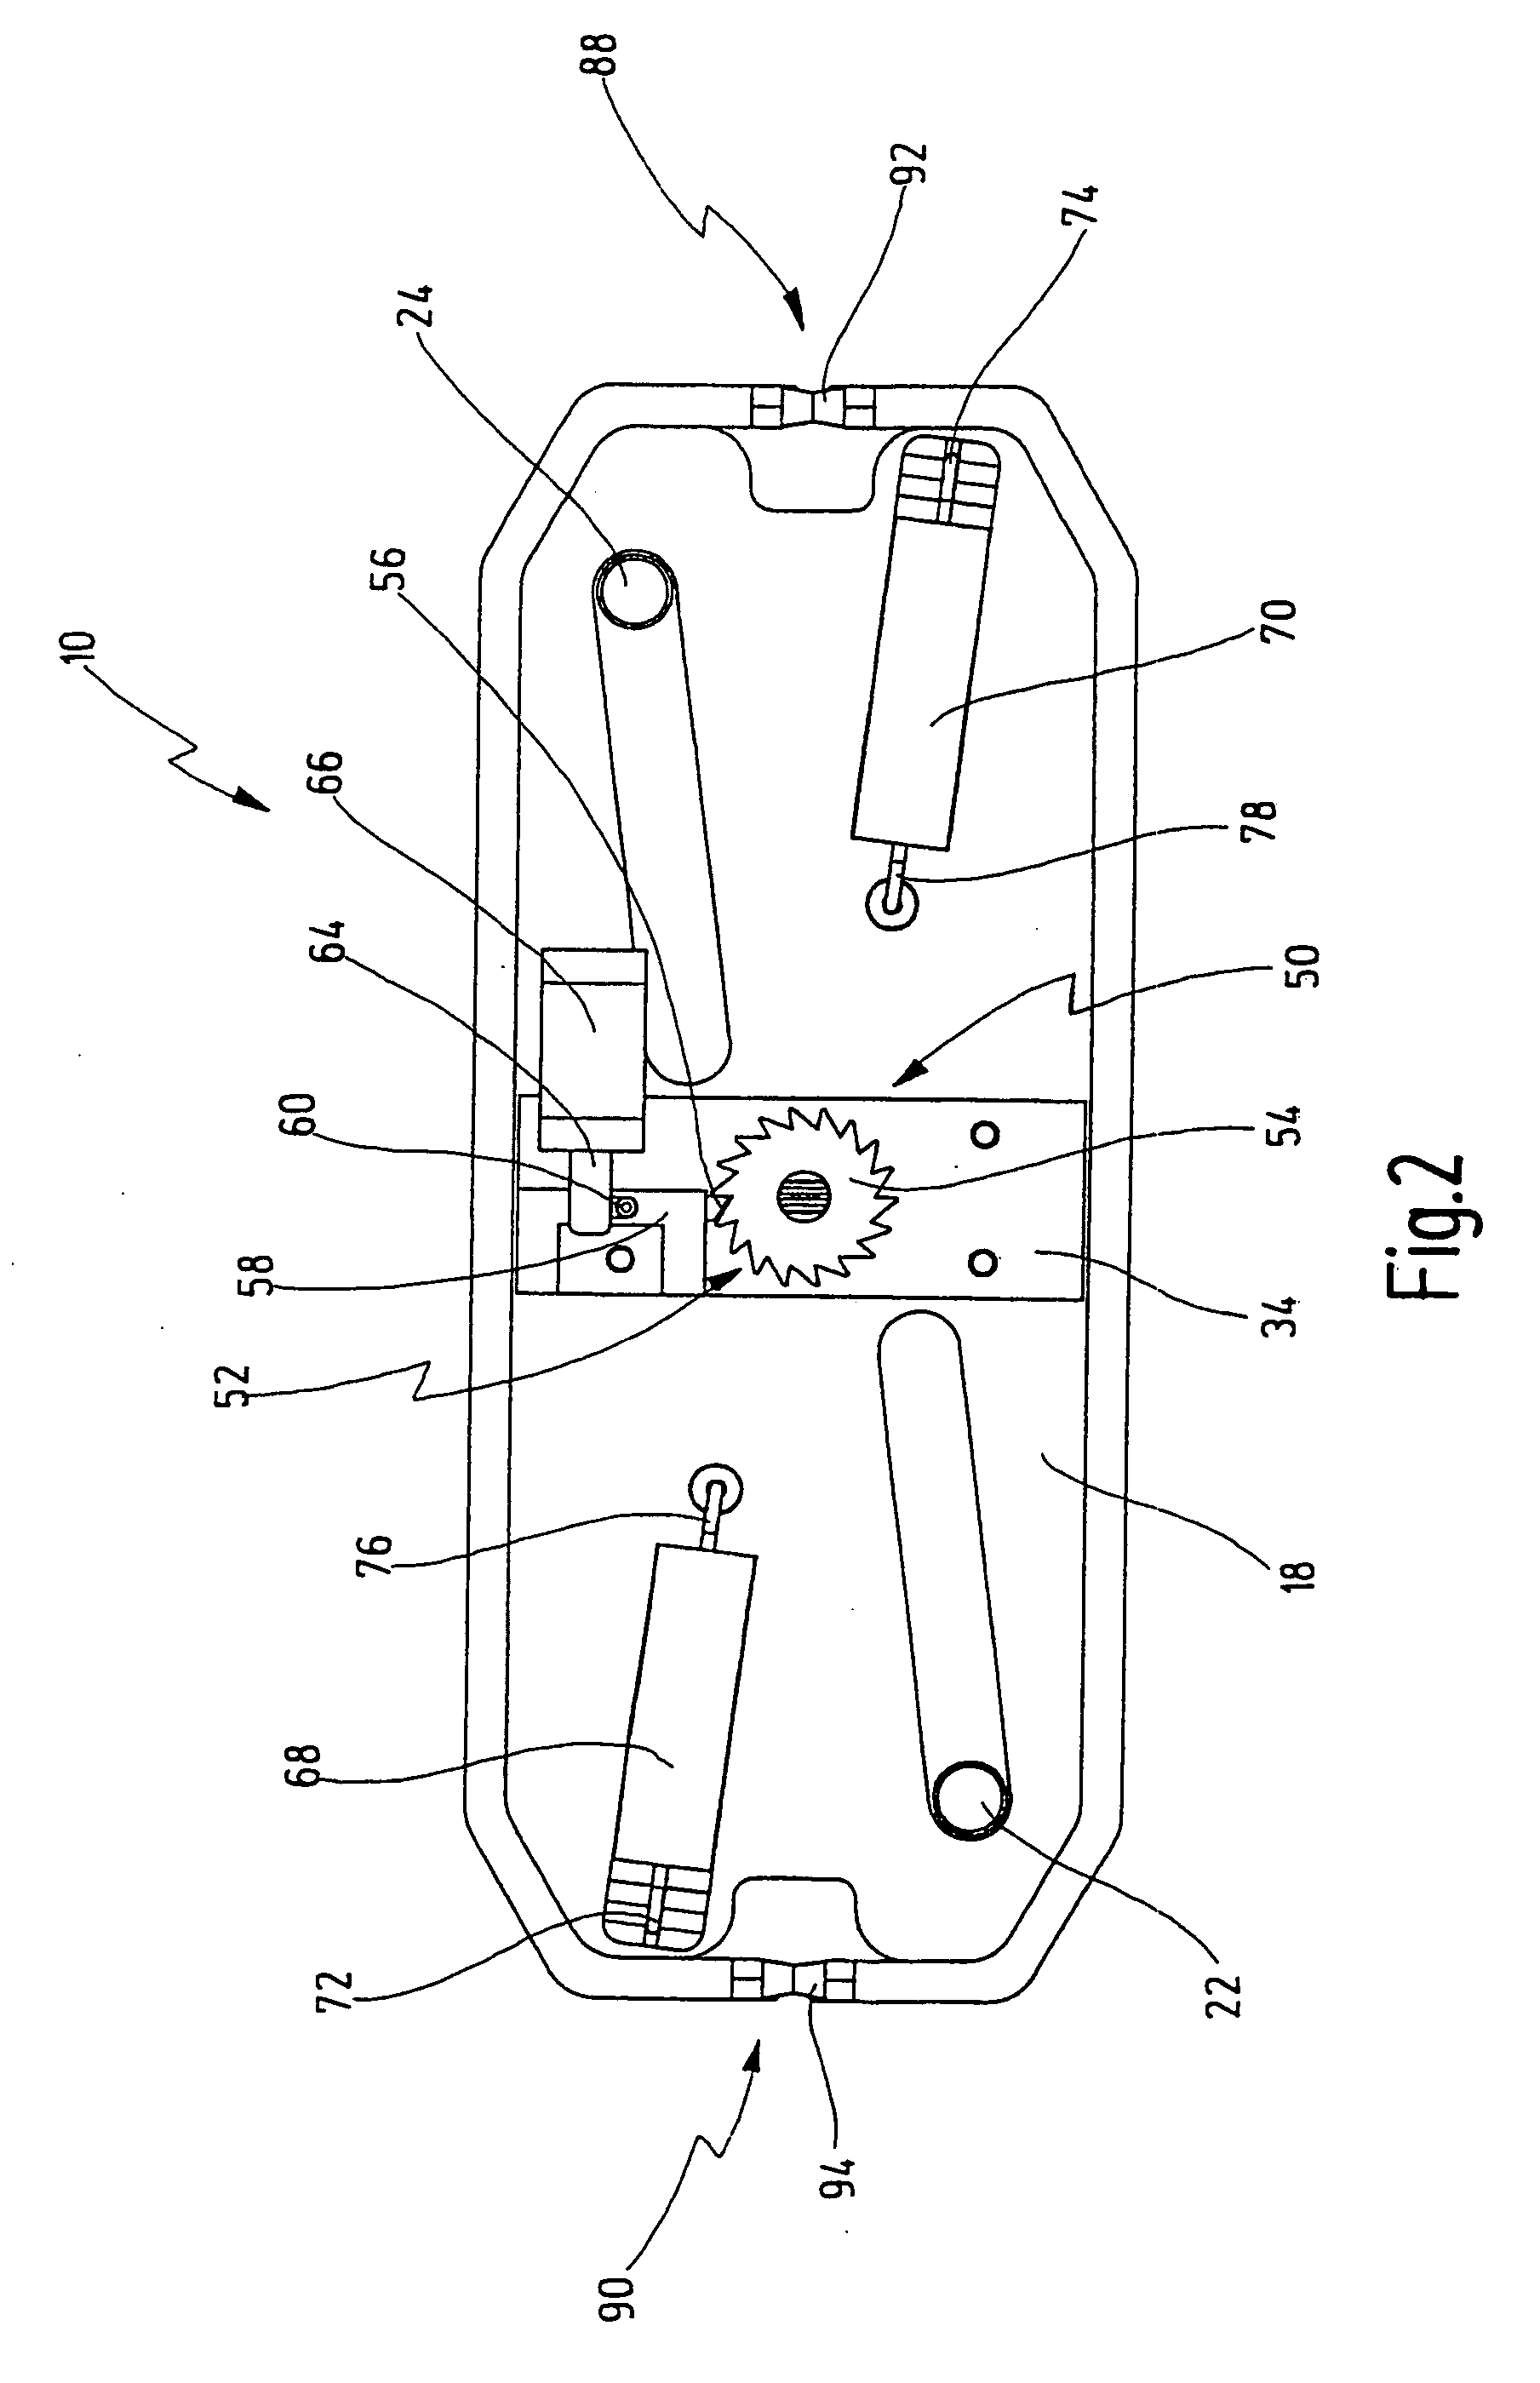 Device for fixing and tensioning at least one pulling thread for applying a neovagina